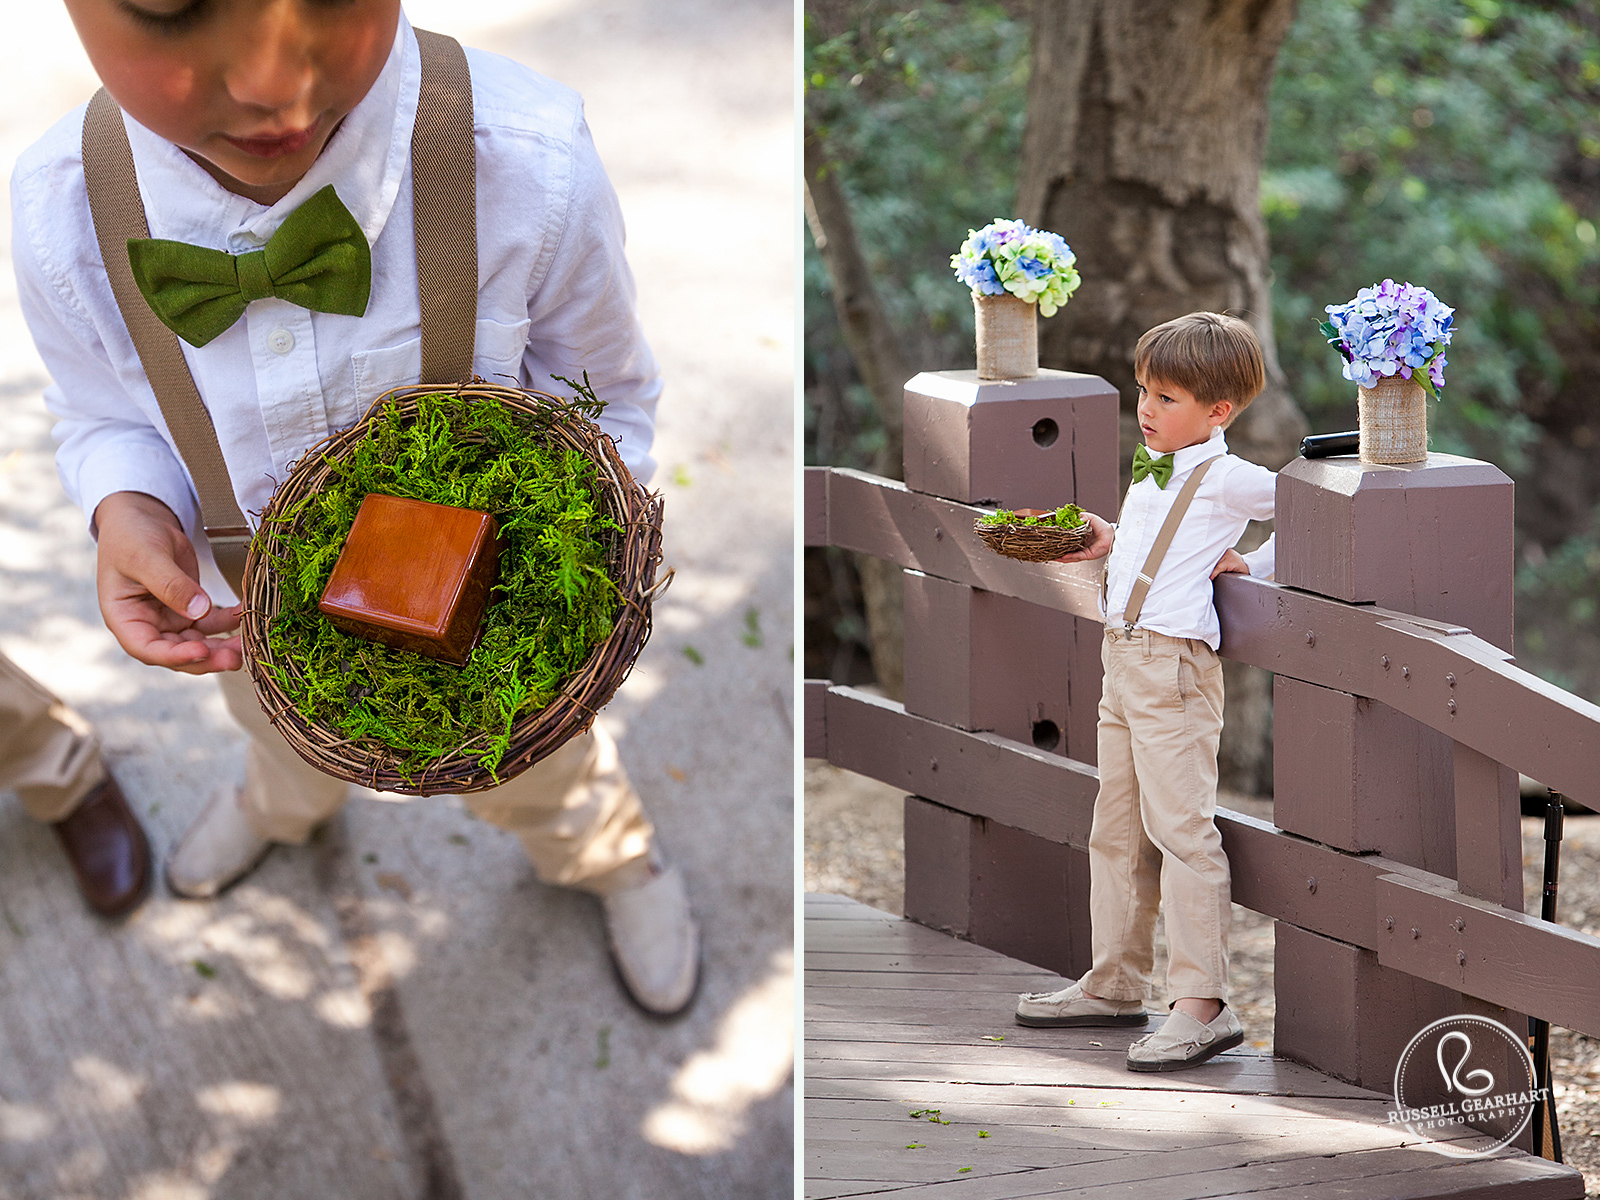 Ring Bearer with Green Bow Tie – Oak Canyon Wedding  – Russell Gearhart Photography – www.gearhartphoto.com  